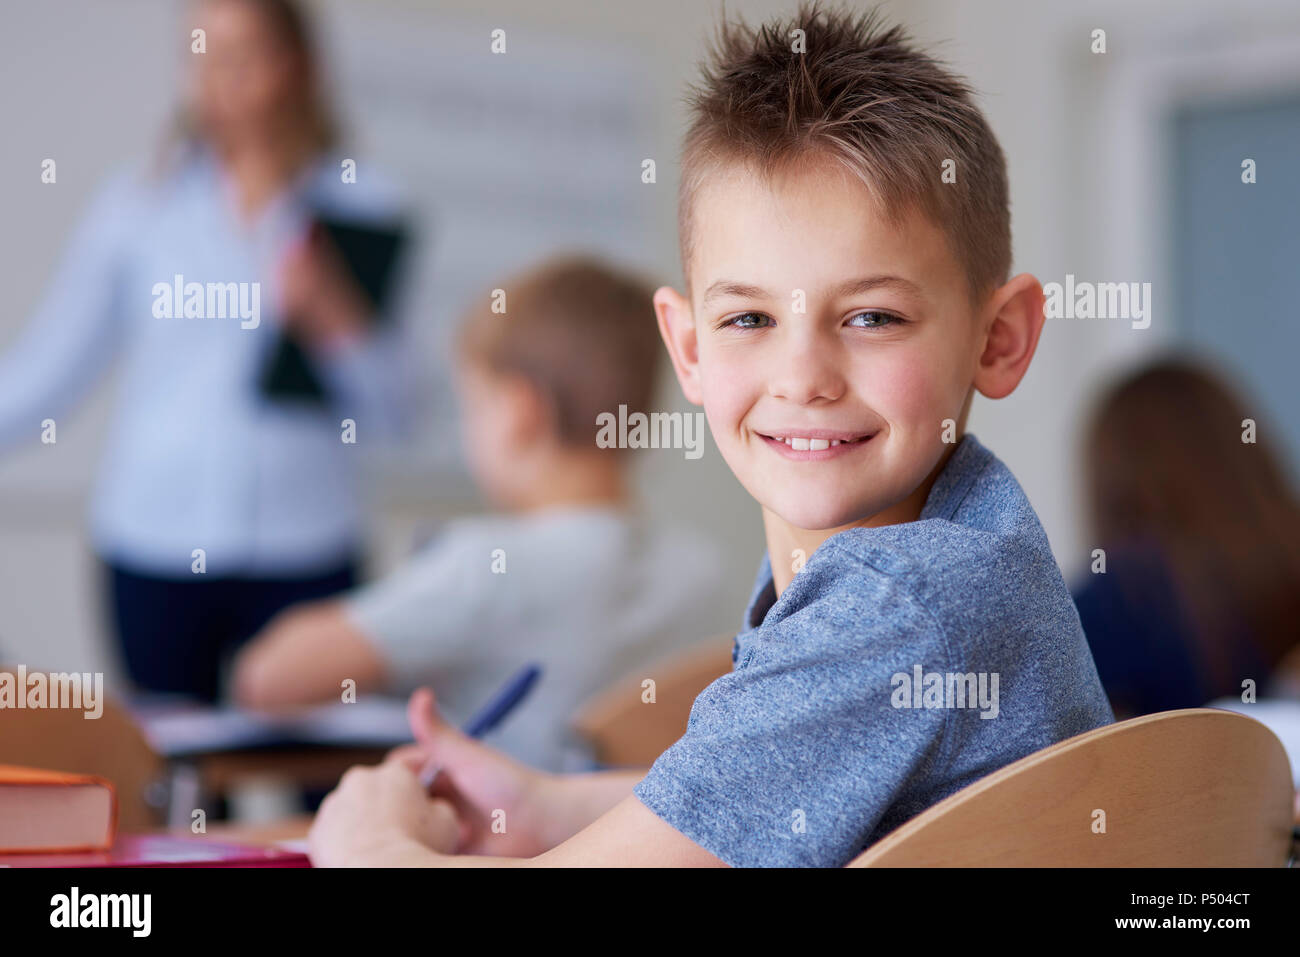 Portrait of smiling schoolboy in class Stock Photo